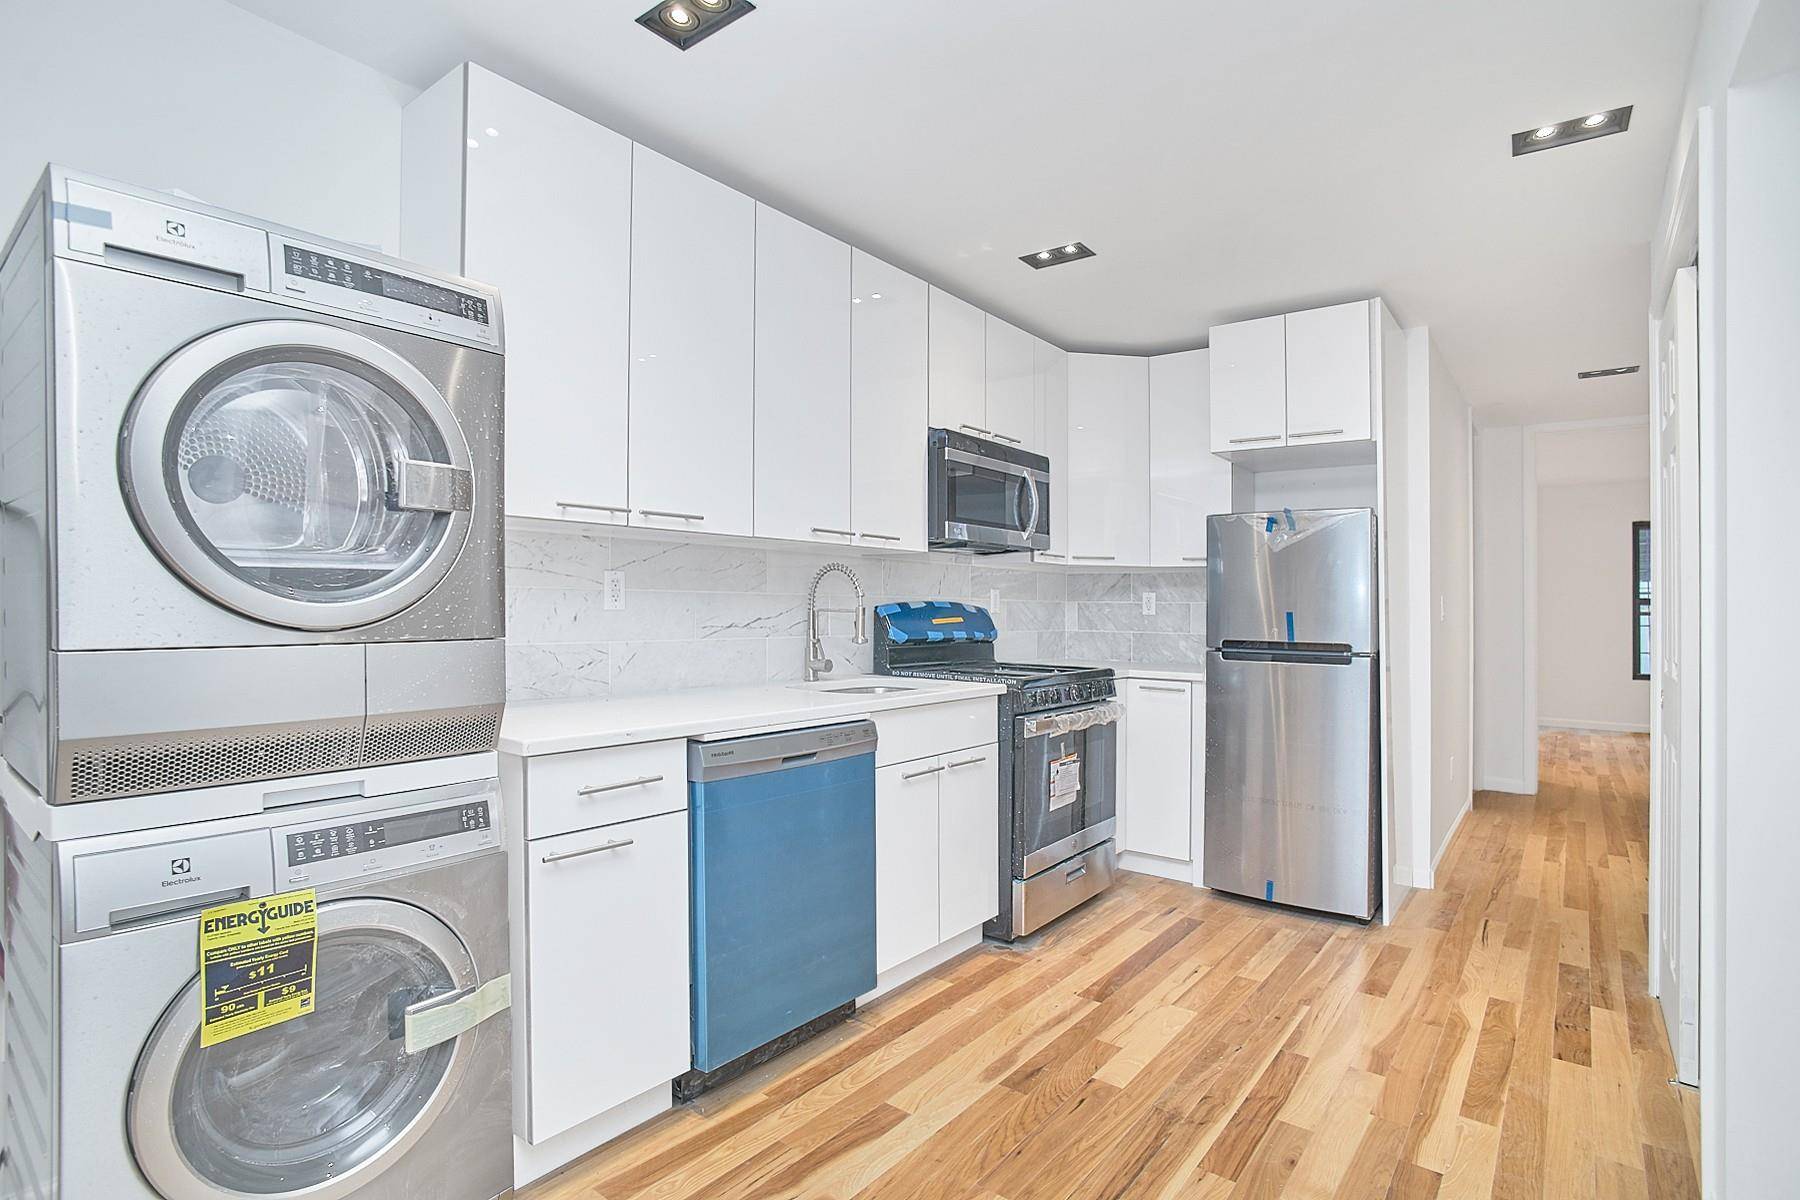 Newly renovated 2 bedroom with washer dryer in unit next to Brooklyn Army Terminal, NYU Langone Hospital and the 59th street NR trains !